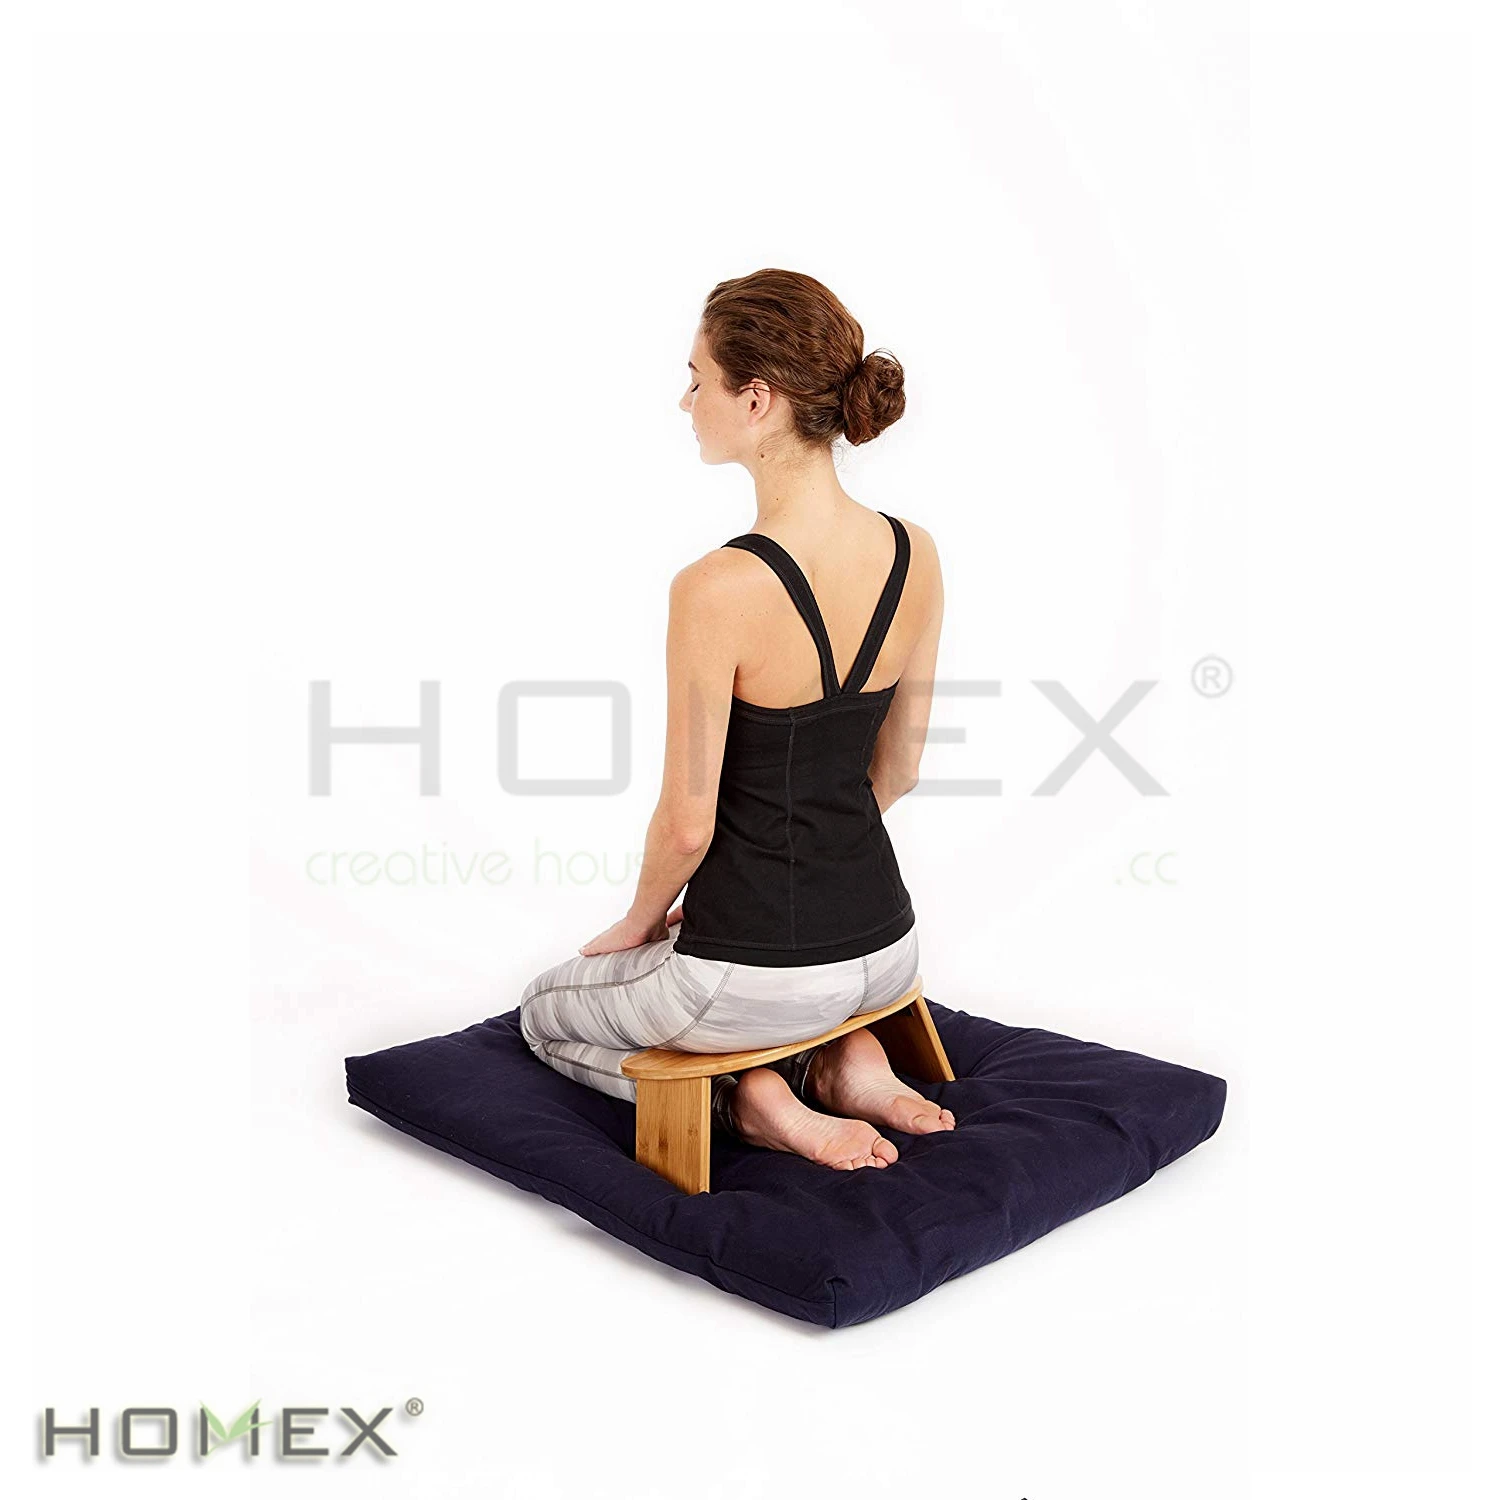 Homex Amazon Top Seller Bamboo Yoga Meditation Stool Bench Seiza Bench with Foldable Legs